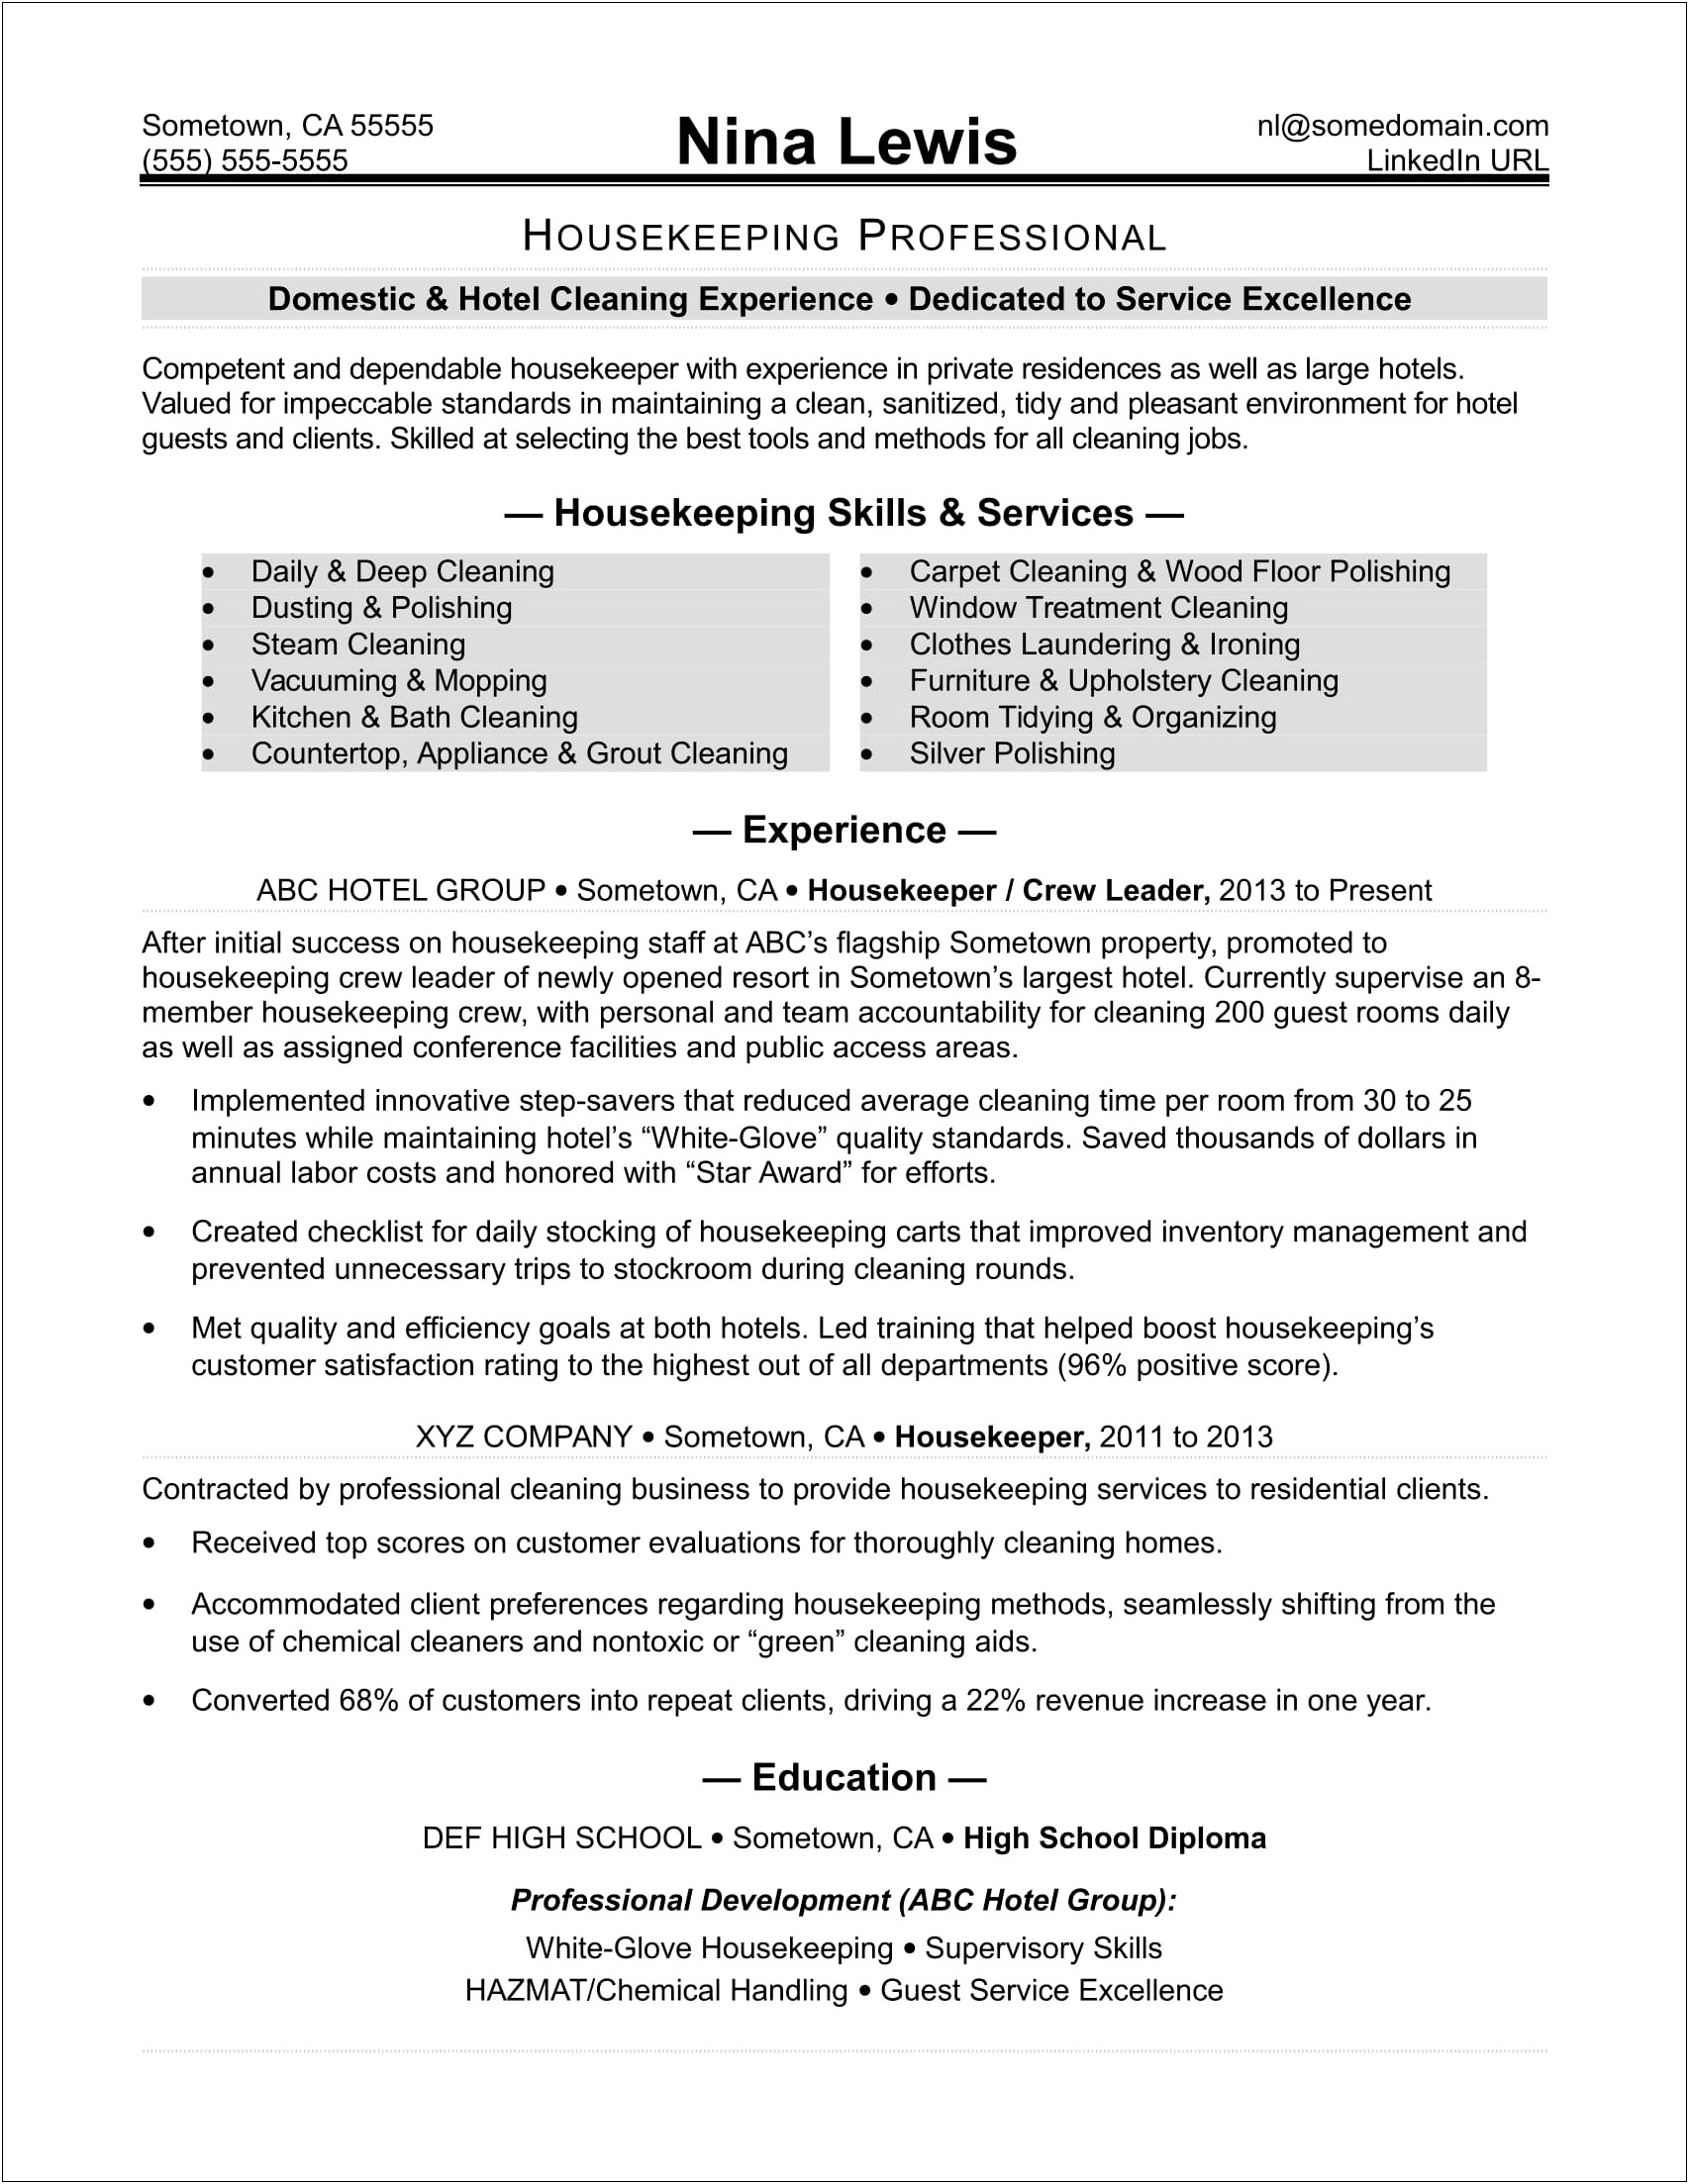 Examples Of Objectives In Resume For Service Crew